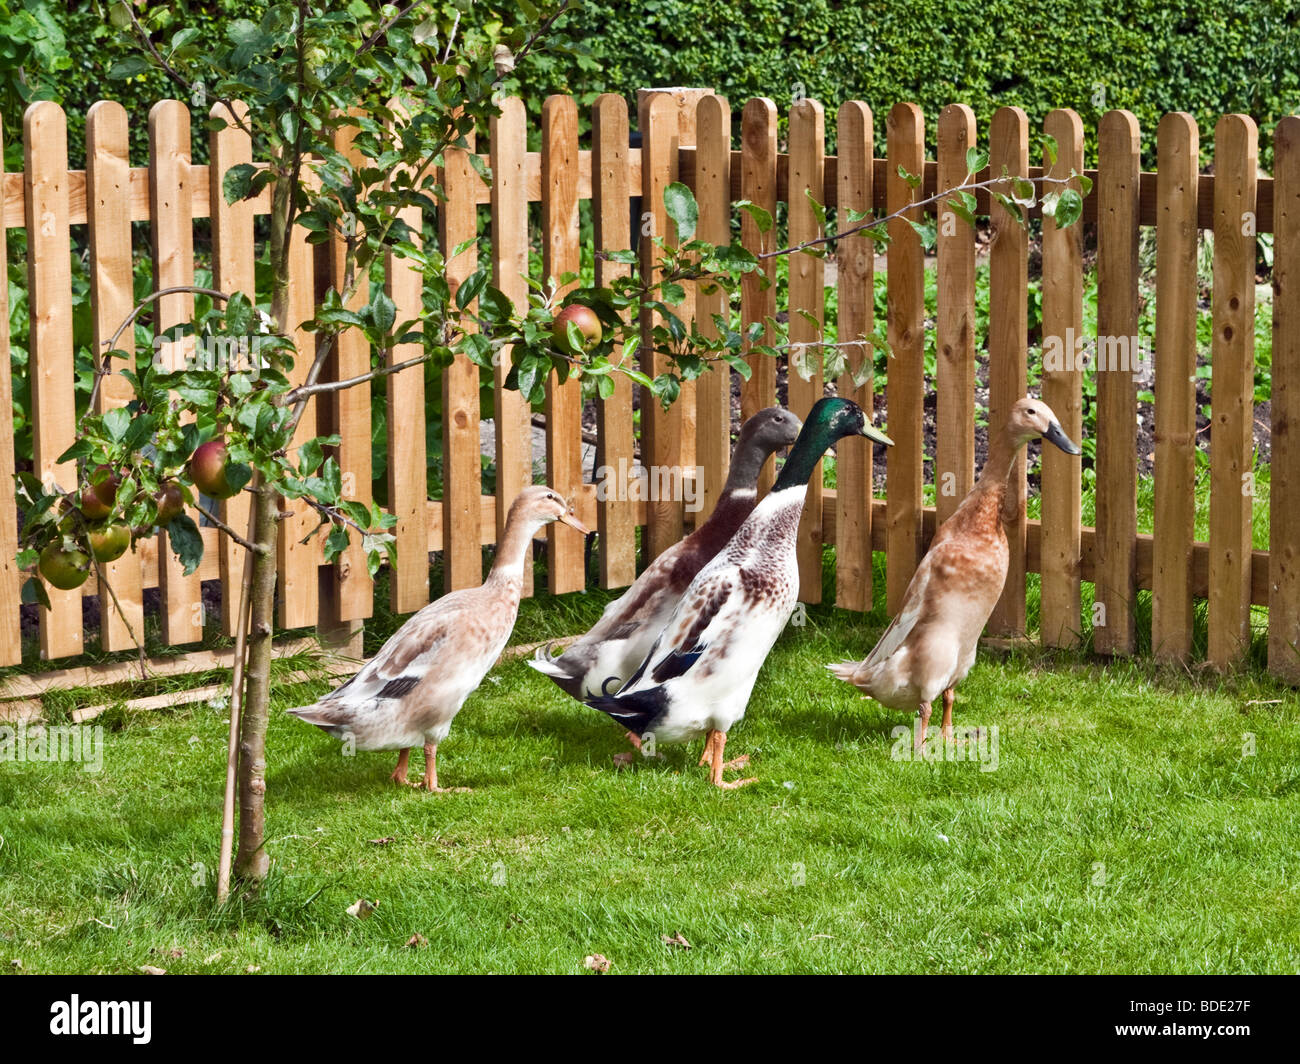 Four Indian Runner ducks, two male, two female in a picket fenced English garden with young apple tree. Stock Photo